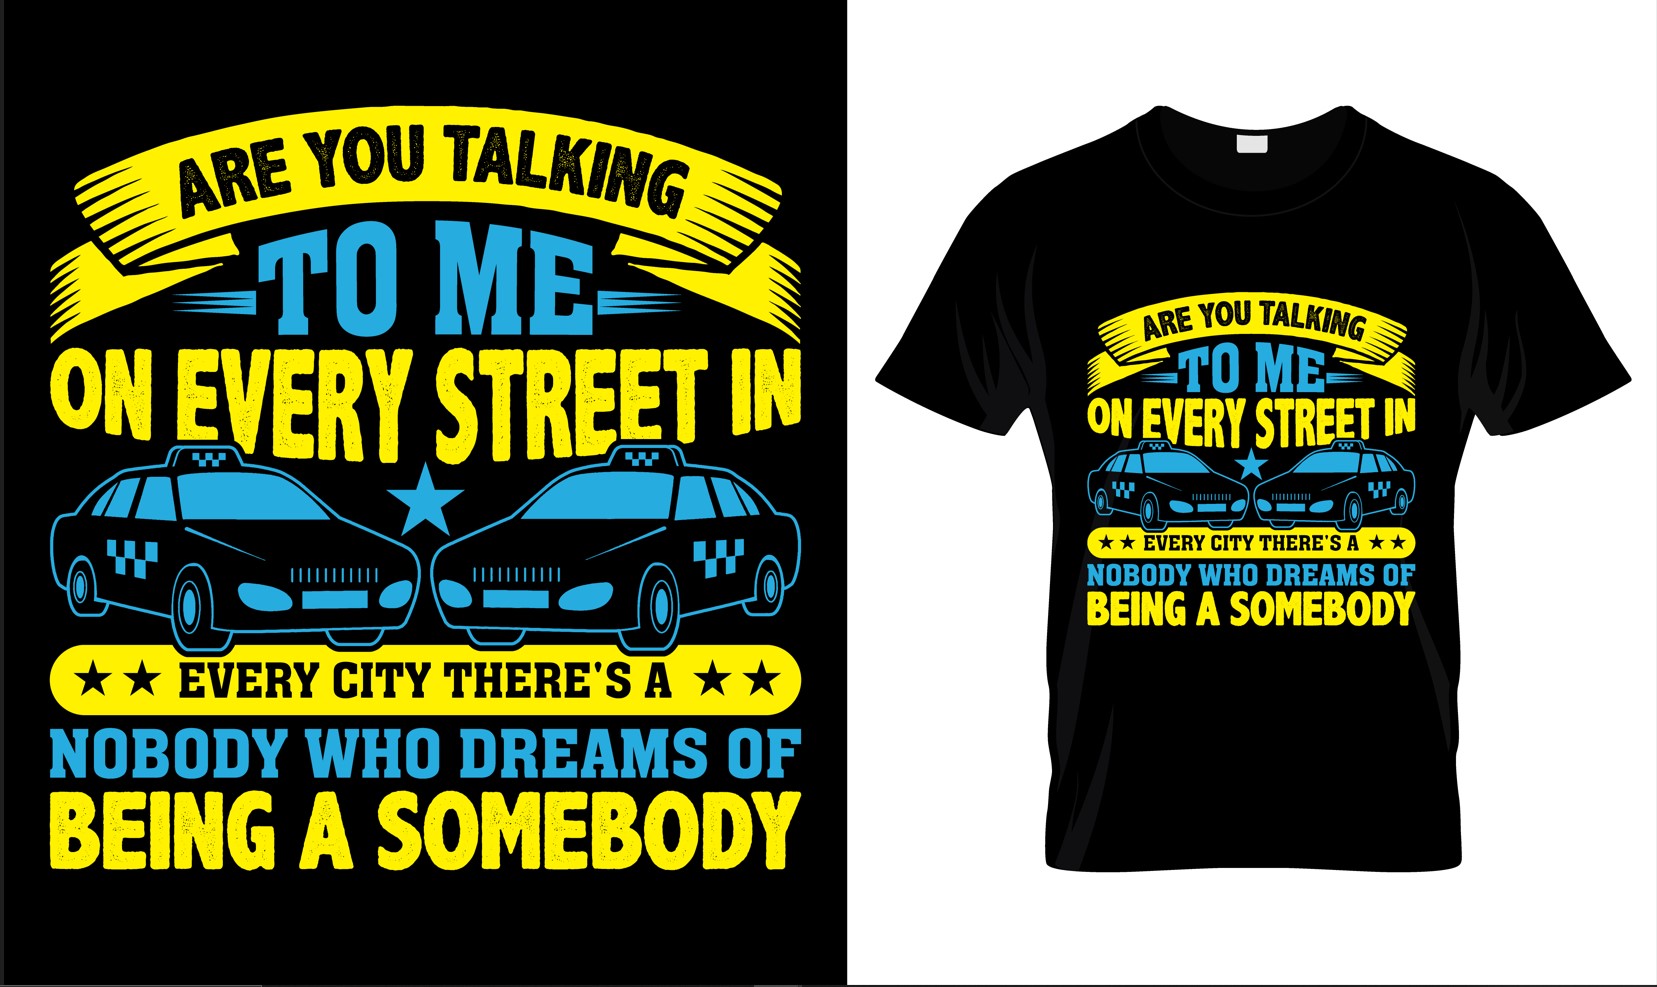 Image of a T-shirt with an enchanting print of a taxi and an inscription